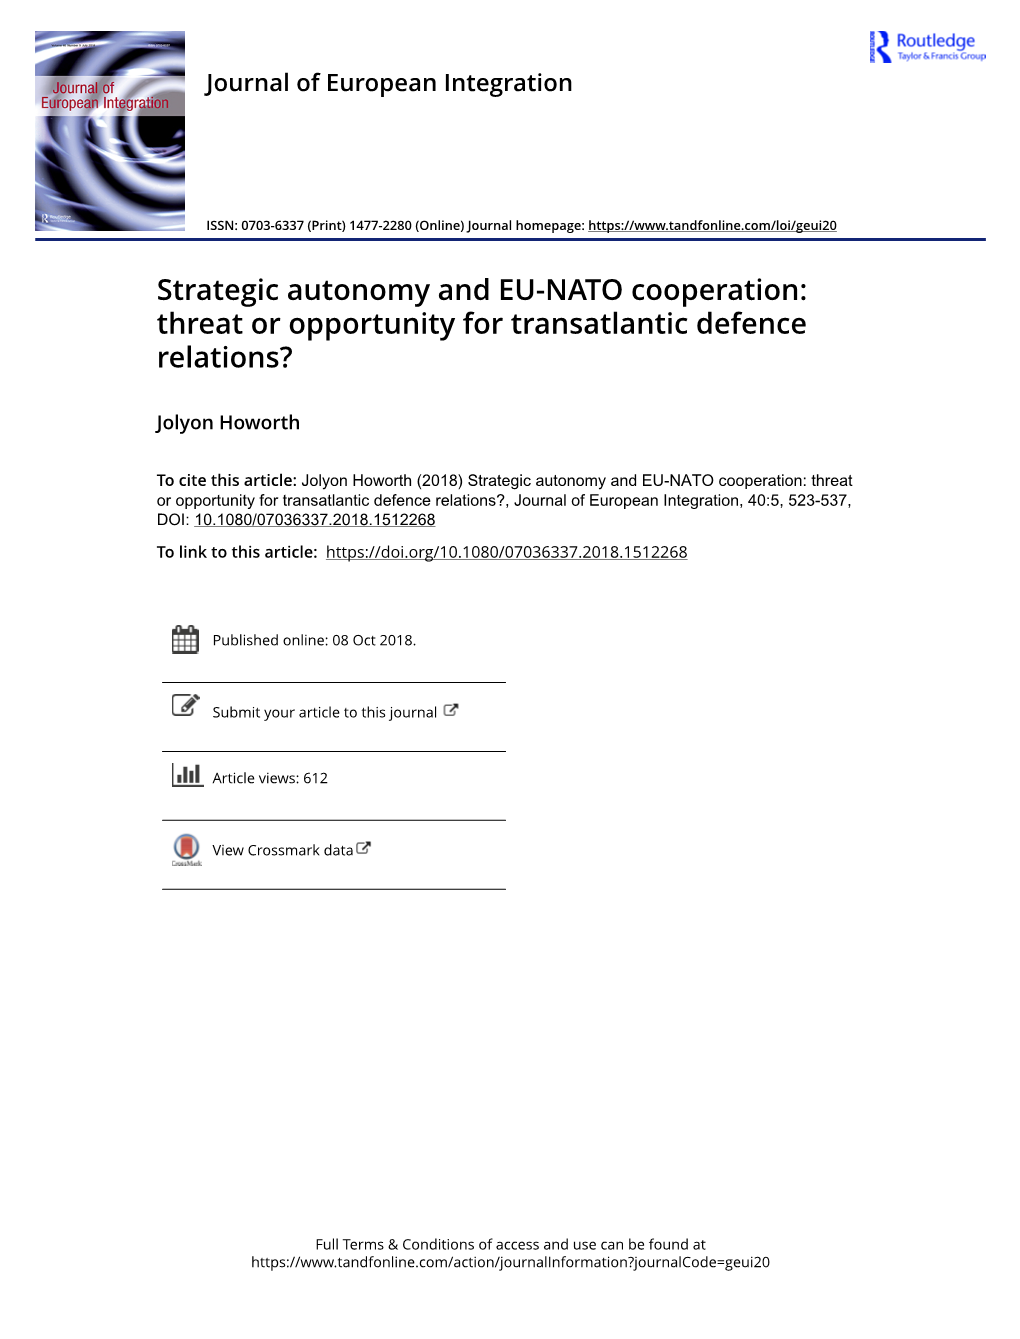 Strategic Autonomy and EU-NATO Cooperation: Threat Or Opportunity for Transatlantic Defence Relations?